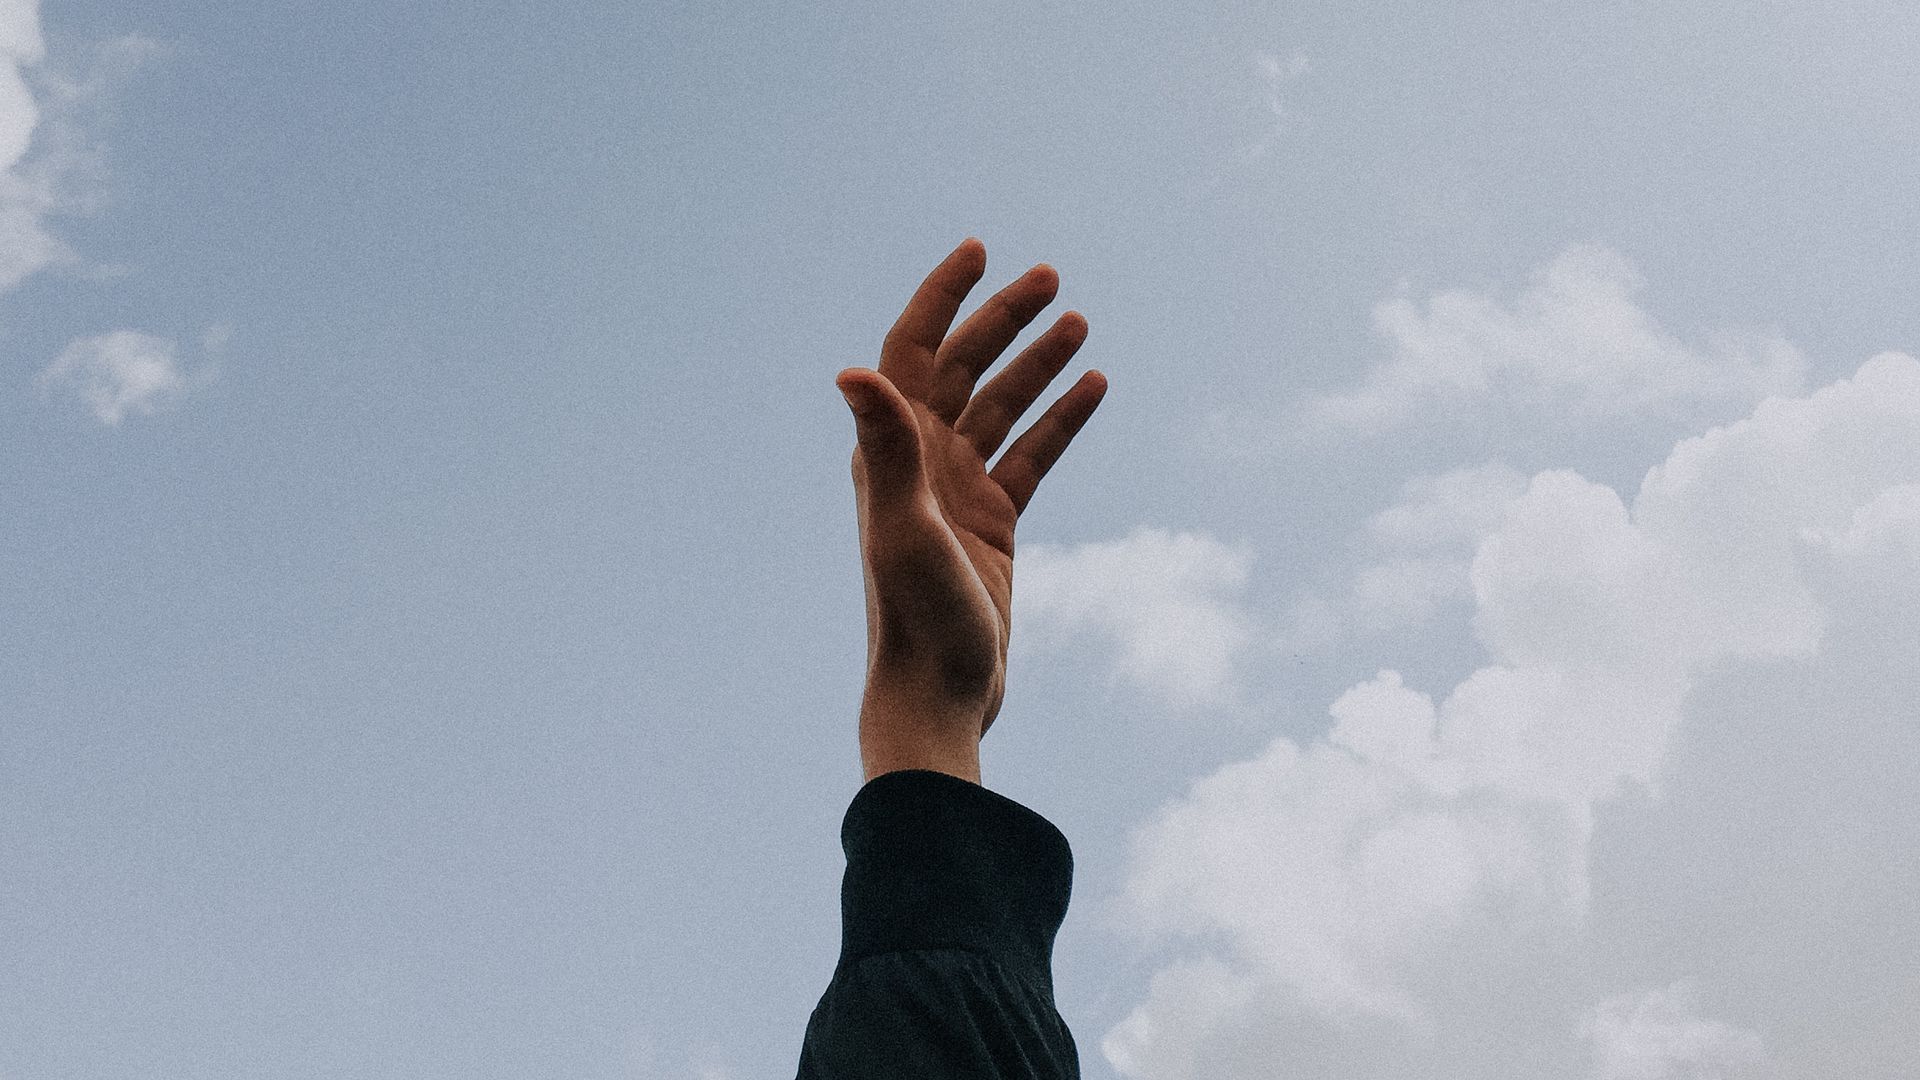 Download wallpaper 1920x1080 hand, sky, fingers, clouds, raise, freedom ...